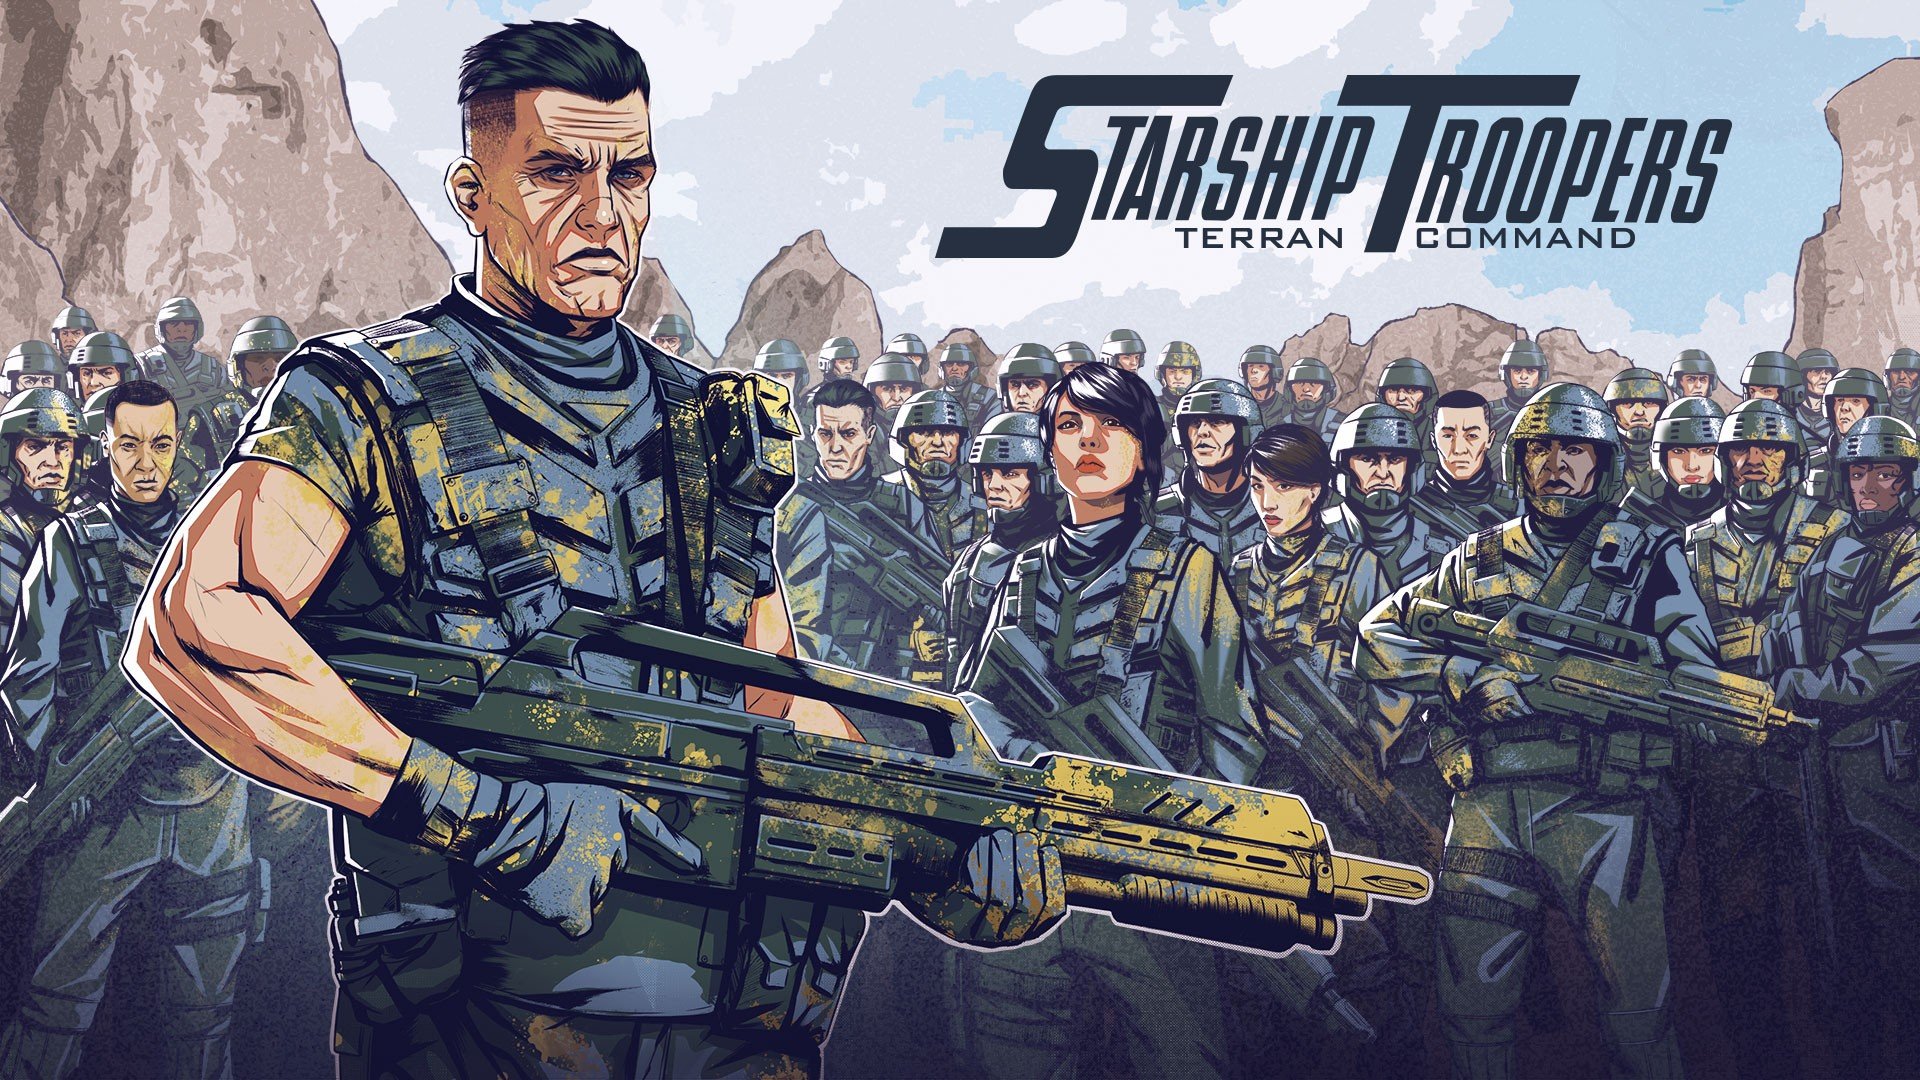 Starship Troopers: Terran Command Brings The Fight to The Bugs in New Video & Demo